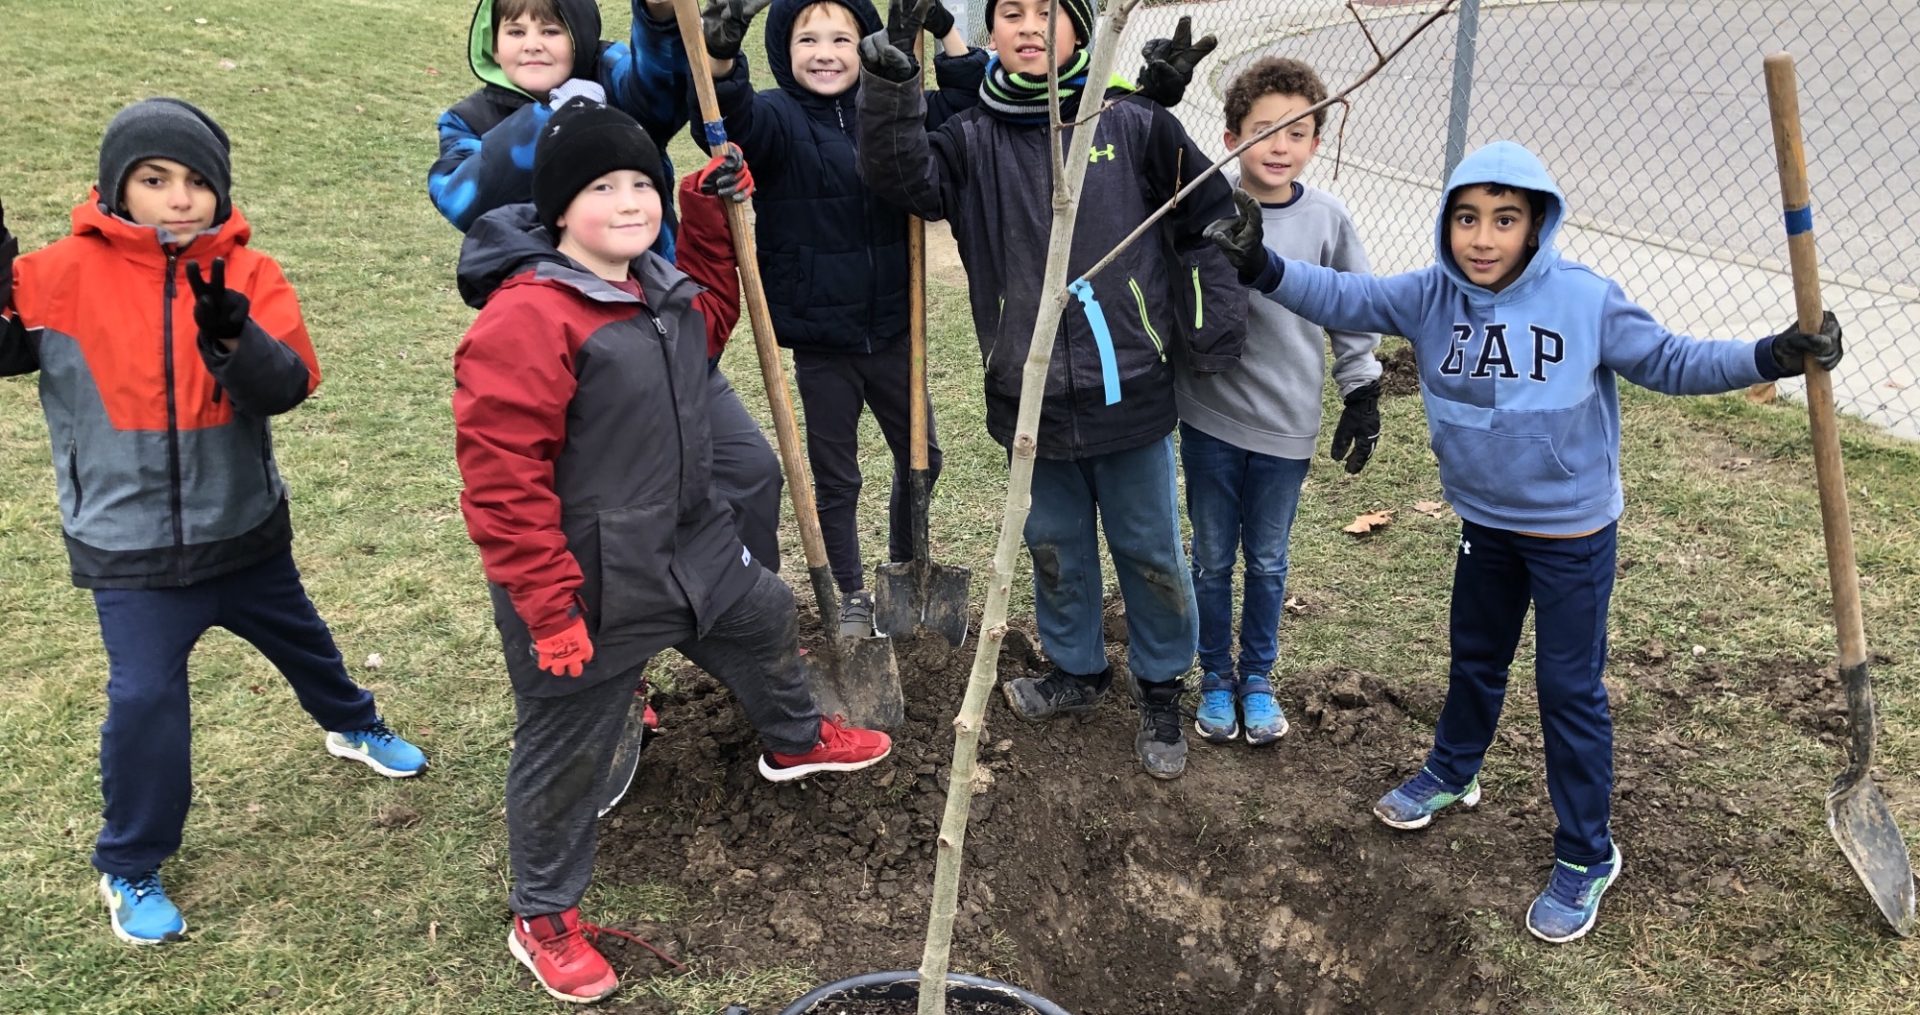 Children planting a large caliper tree in their schoolyard